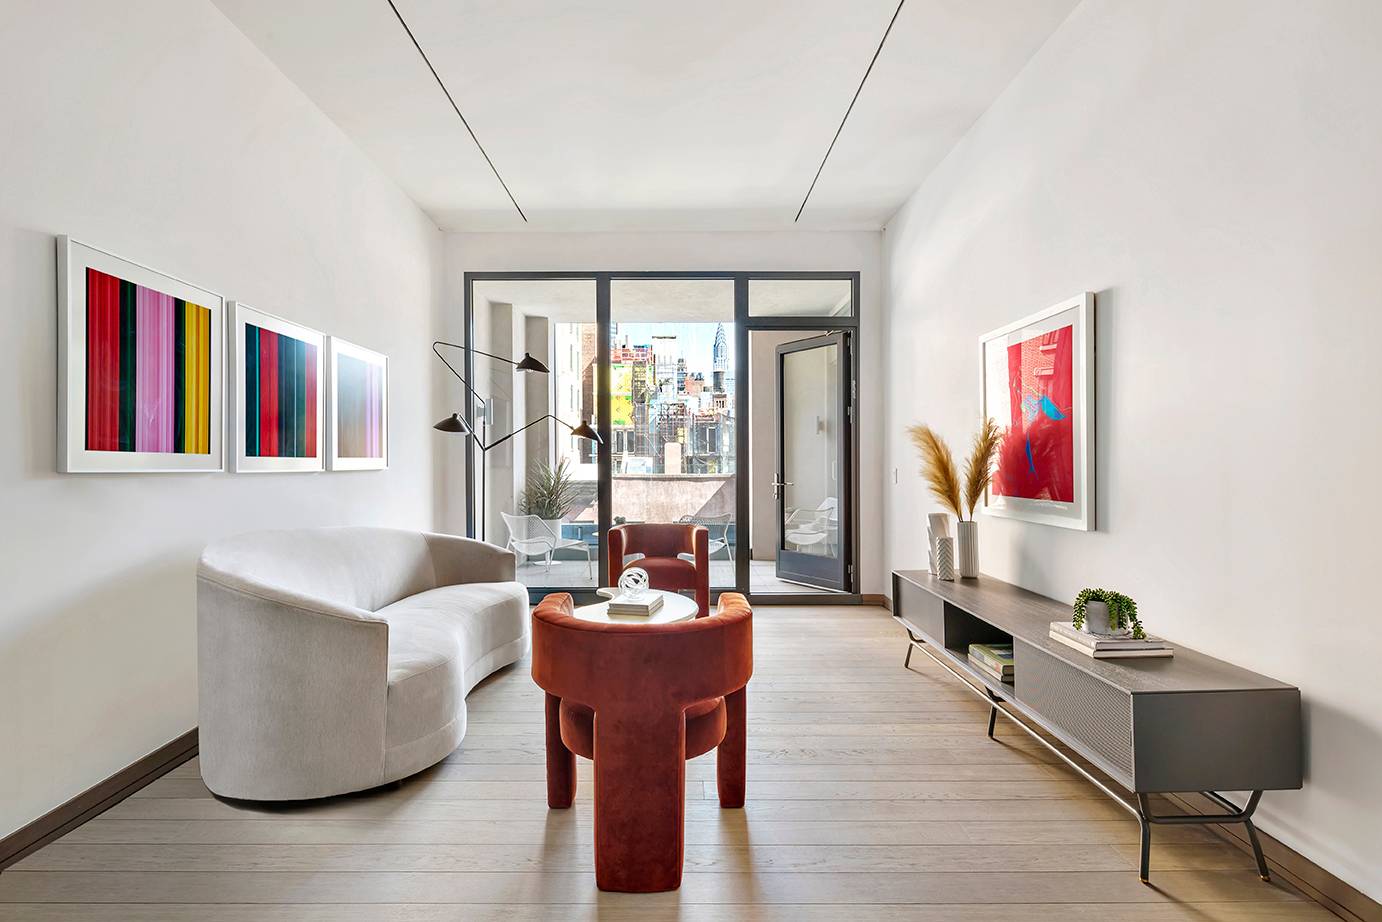 Jumbo one bedroom, one and a half bath residence features dramatic 10 4 ceilings, oversized windows with northern exposures, and a private terrace with city views of the Chrysler Building.